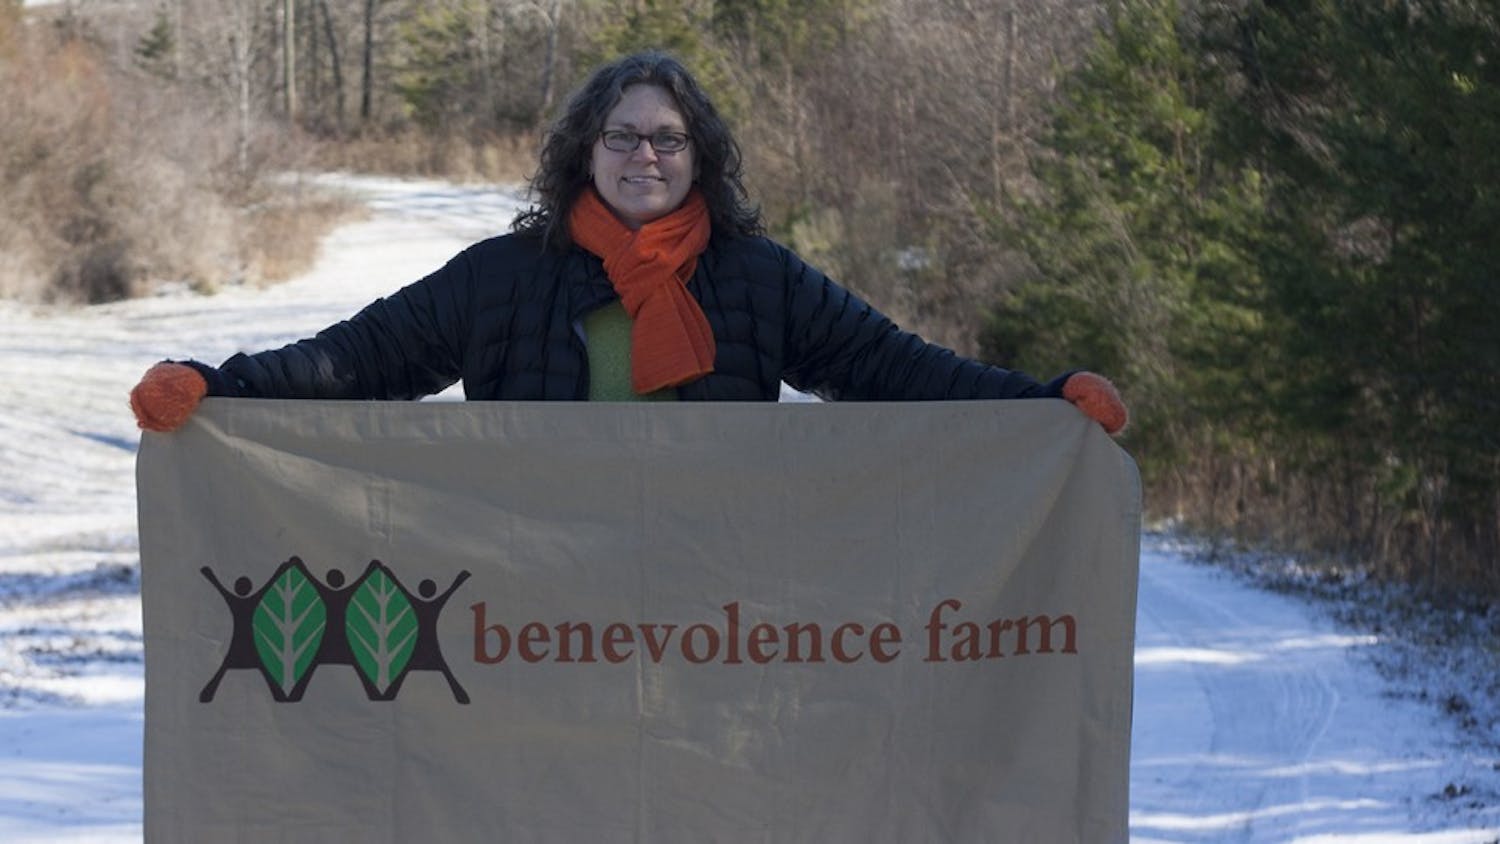 Tanya Jisa is the executive director of Benevolence Farm, a program intended to help female inmates transition out of prison and back into society at large. Jisa hopes to help women and reduce recidivism rates by providing employment and temporary housing on the farm itself 